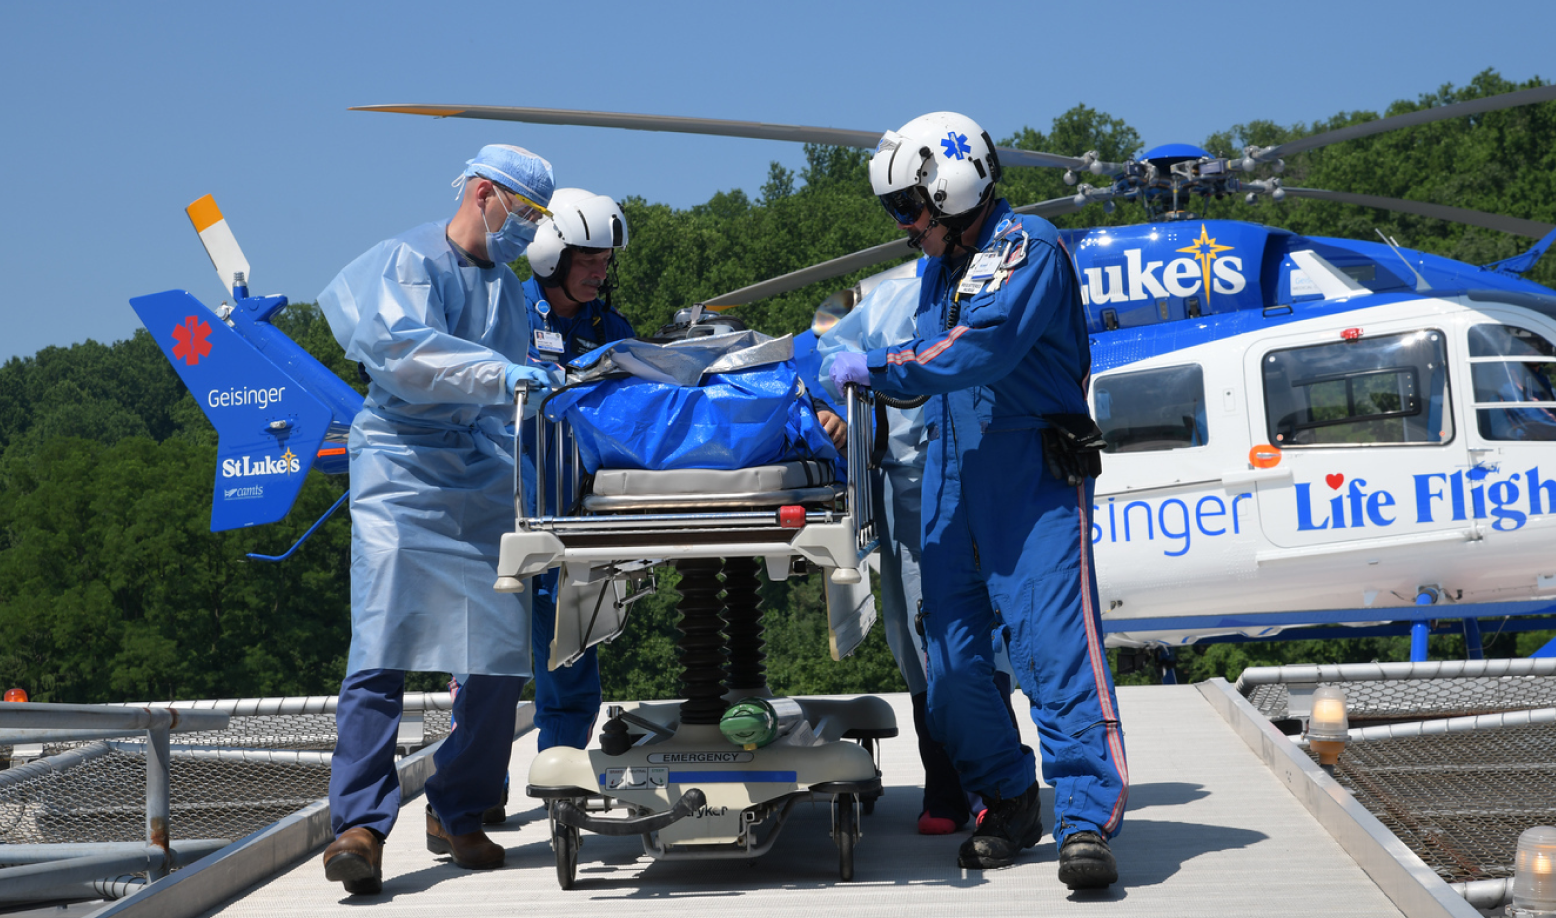 St. Luke's helicopter with medical team helping a patient